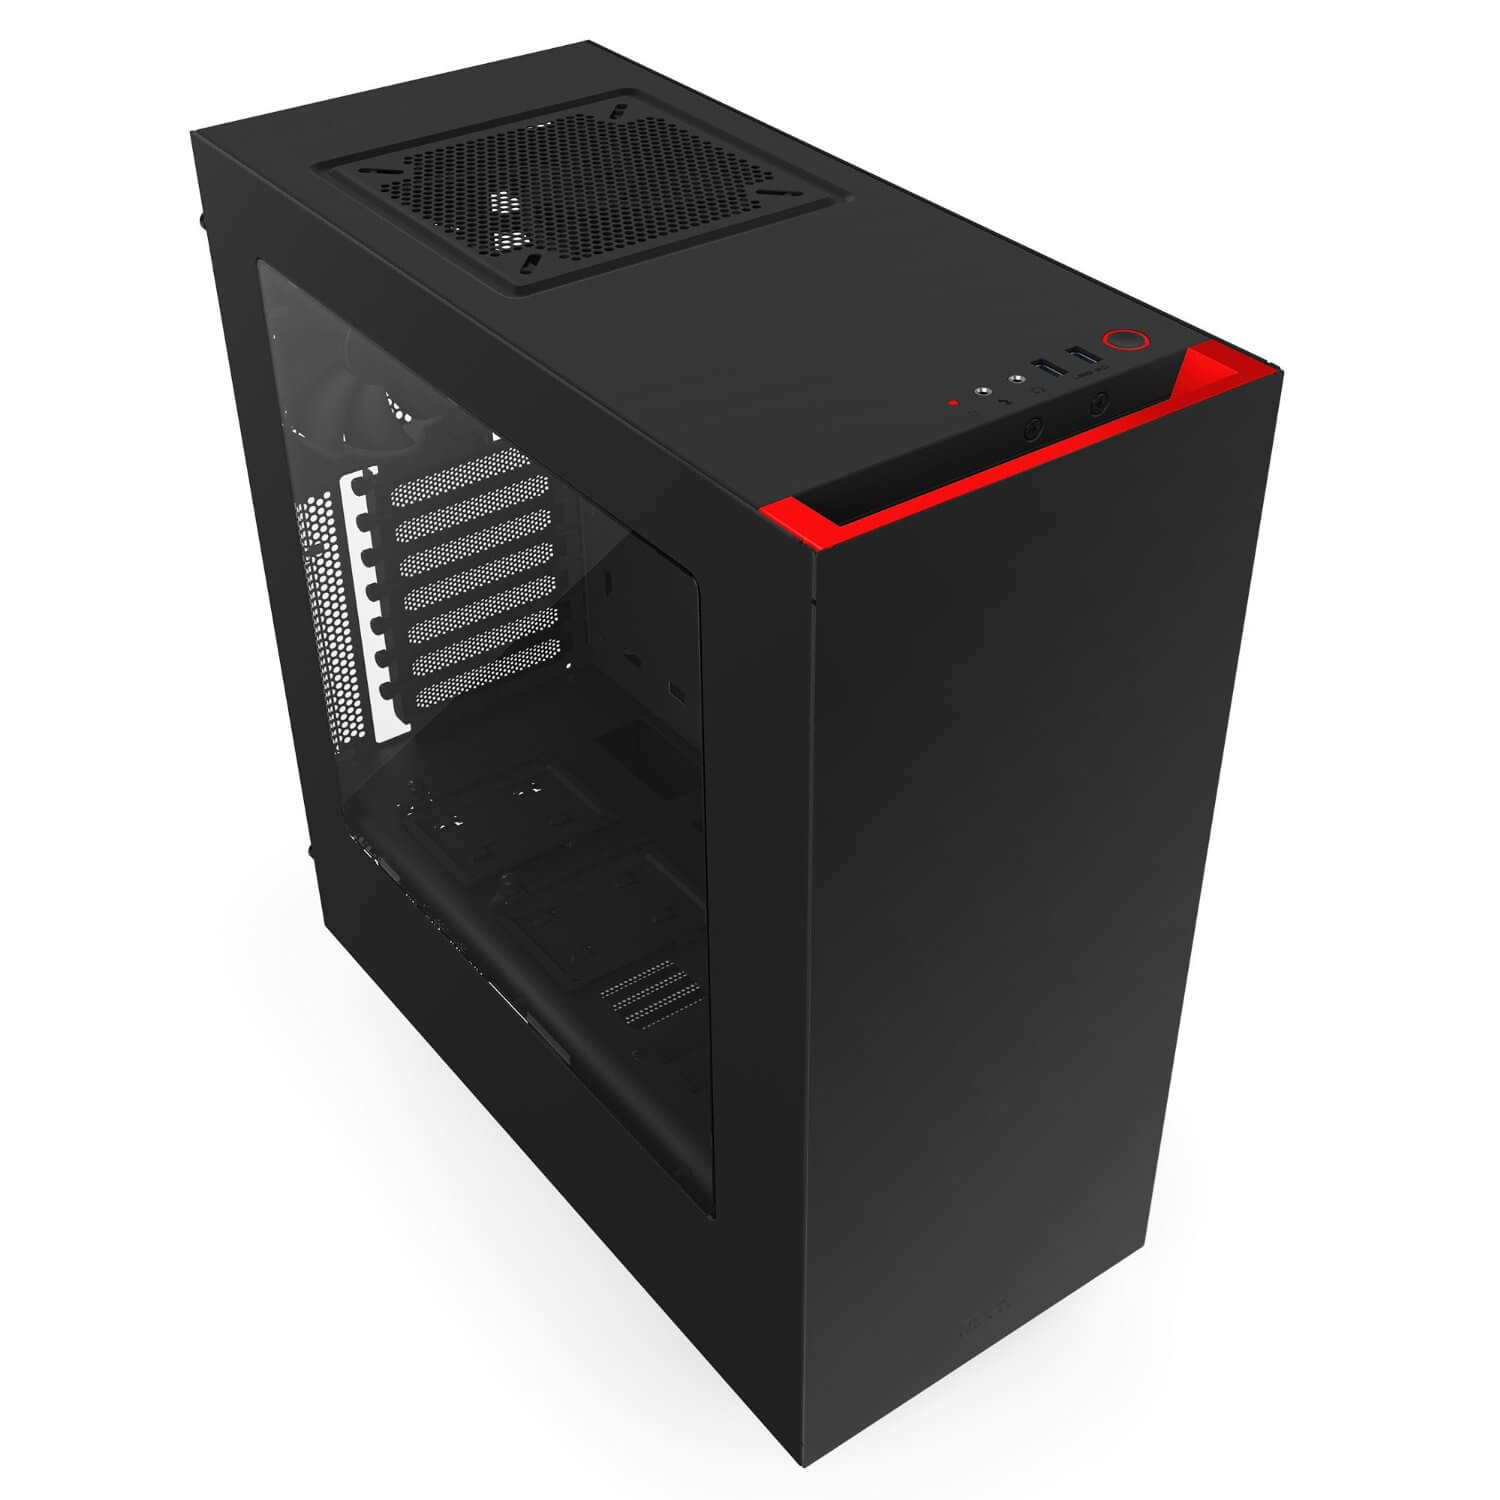 NZXT S340 Mid Tower Case